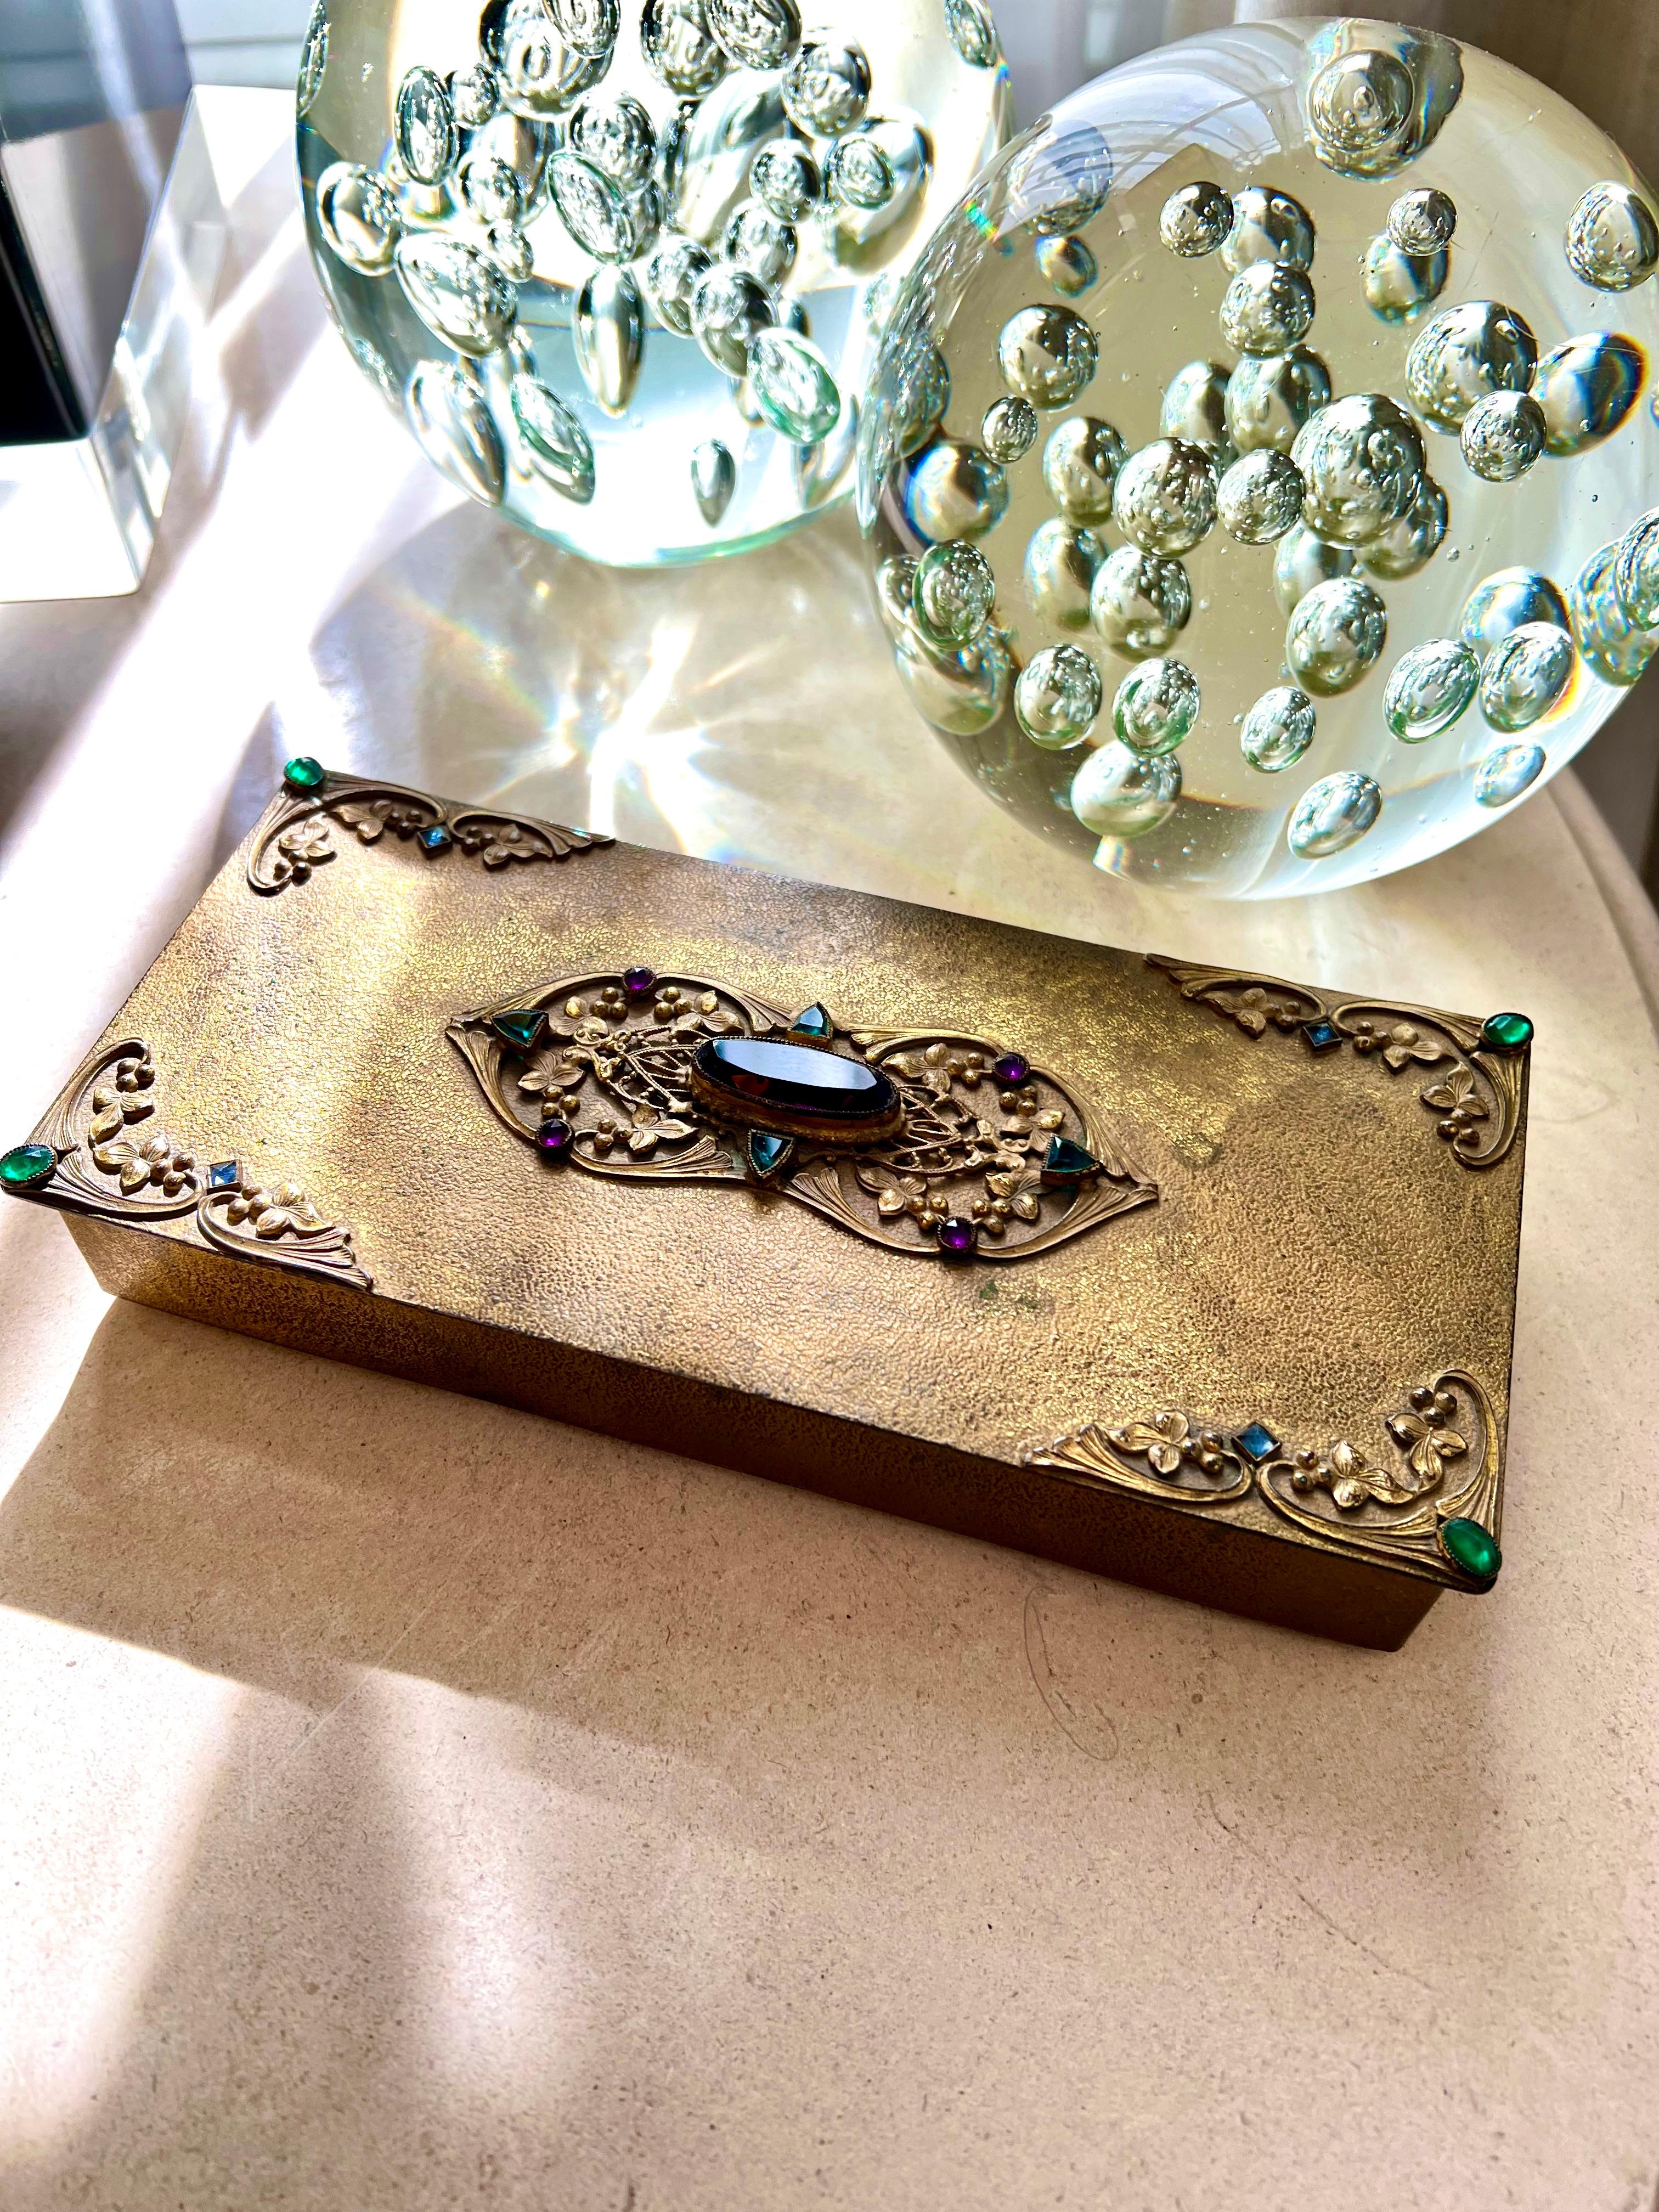 Empire Art Gold Box with Decorative hinged Lid and Jewels 1920 For Sale 3